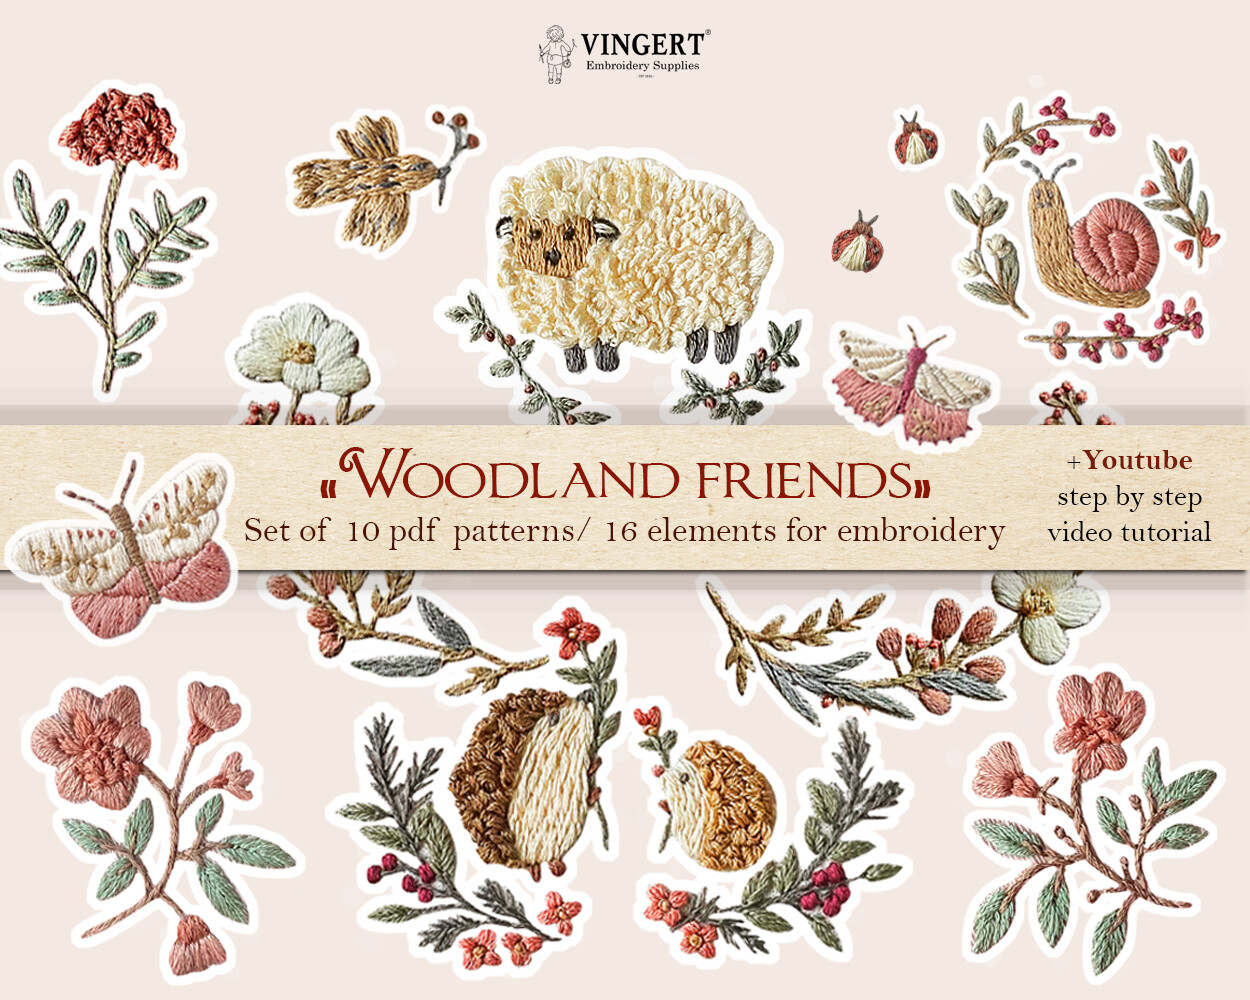 "Woodland friends. Children's collection" 10 pdf patterns for embroidery on kids' clothes (16 elements) + video tutorial